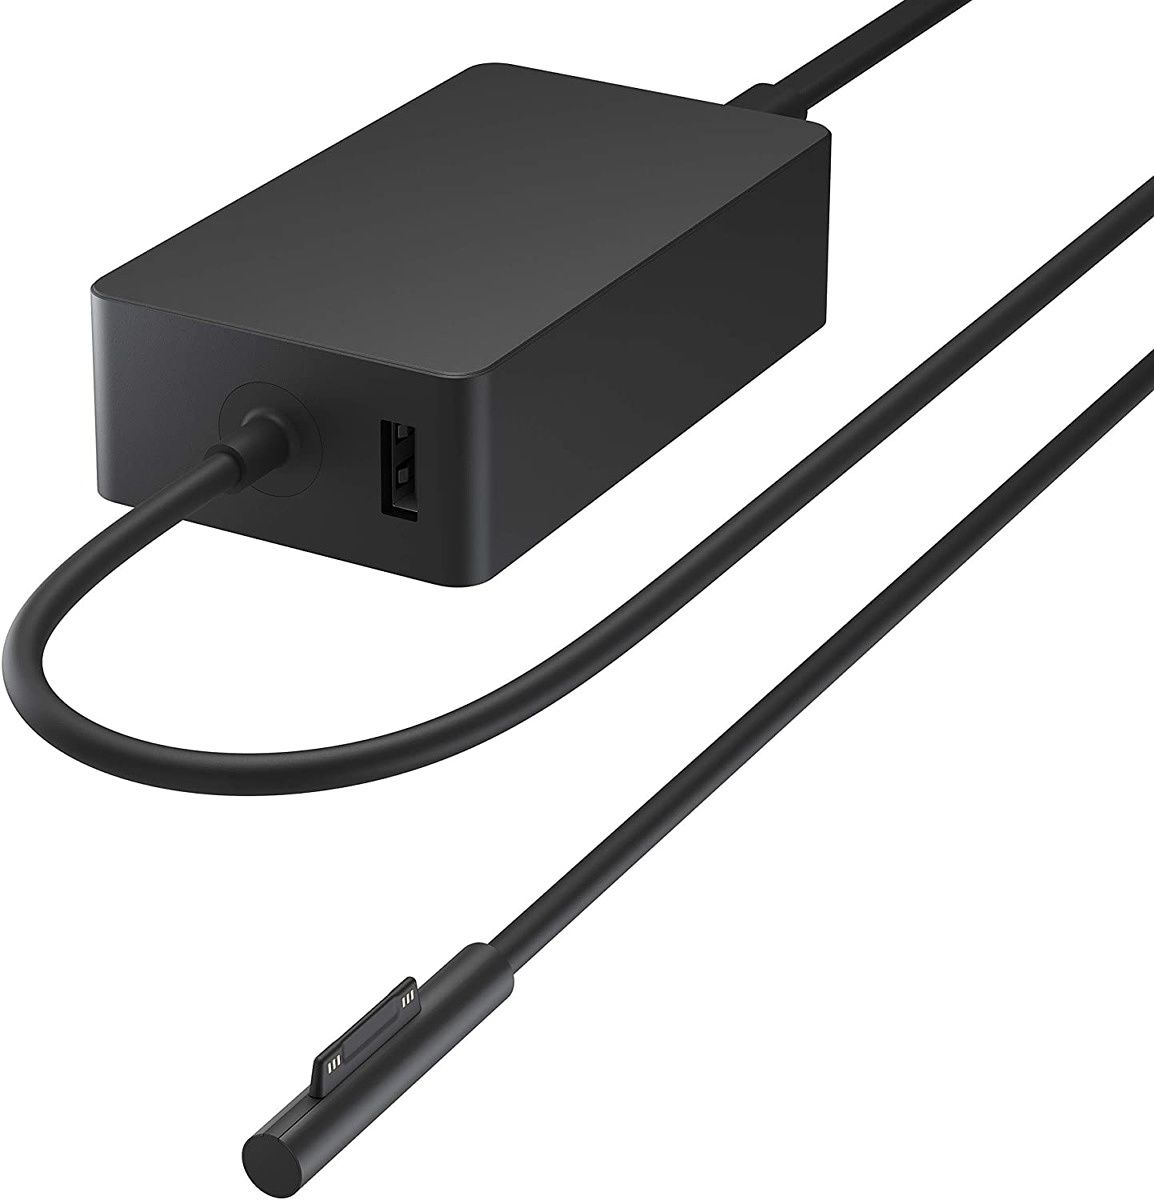 The Surface 127W power supply is overkill for the Surface Pro X, but it's one of the only two options if you're only looking for Microsoft-designed chargers. It's also helpful if you want a single charger for multiple Surface devices, including the Surface Book. Like the 65W power supply, it also packs a USB Type-A port.